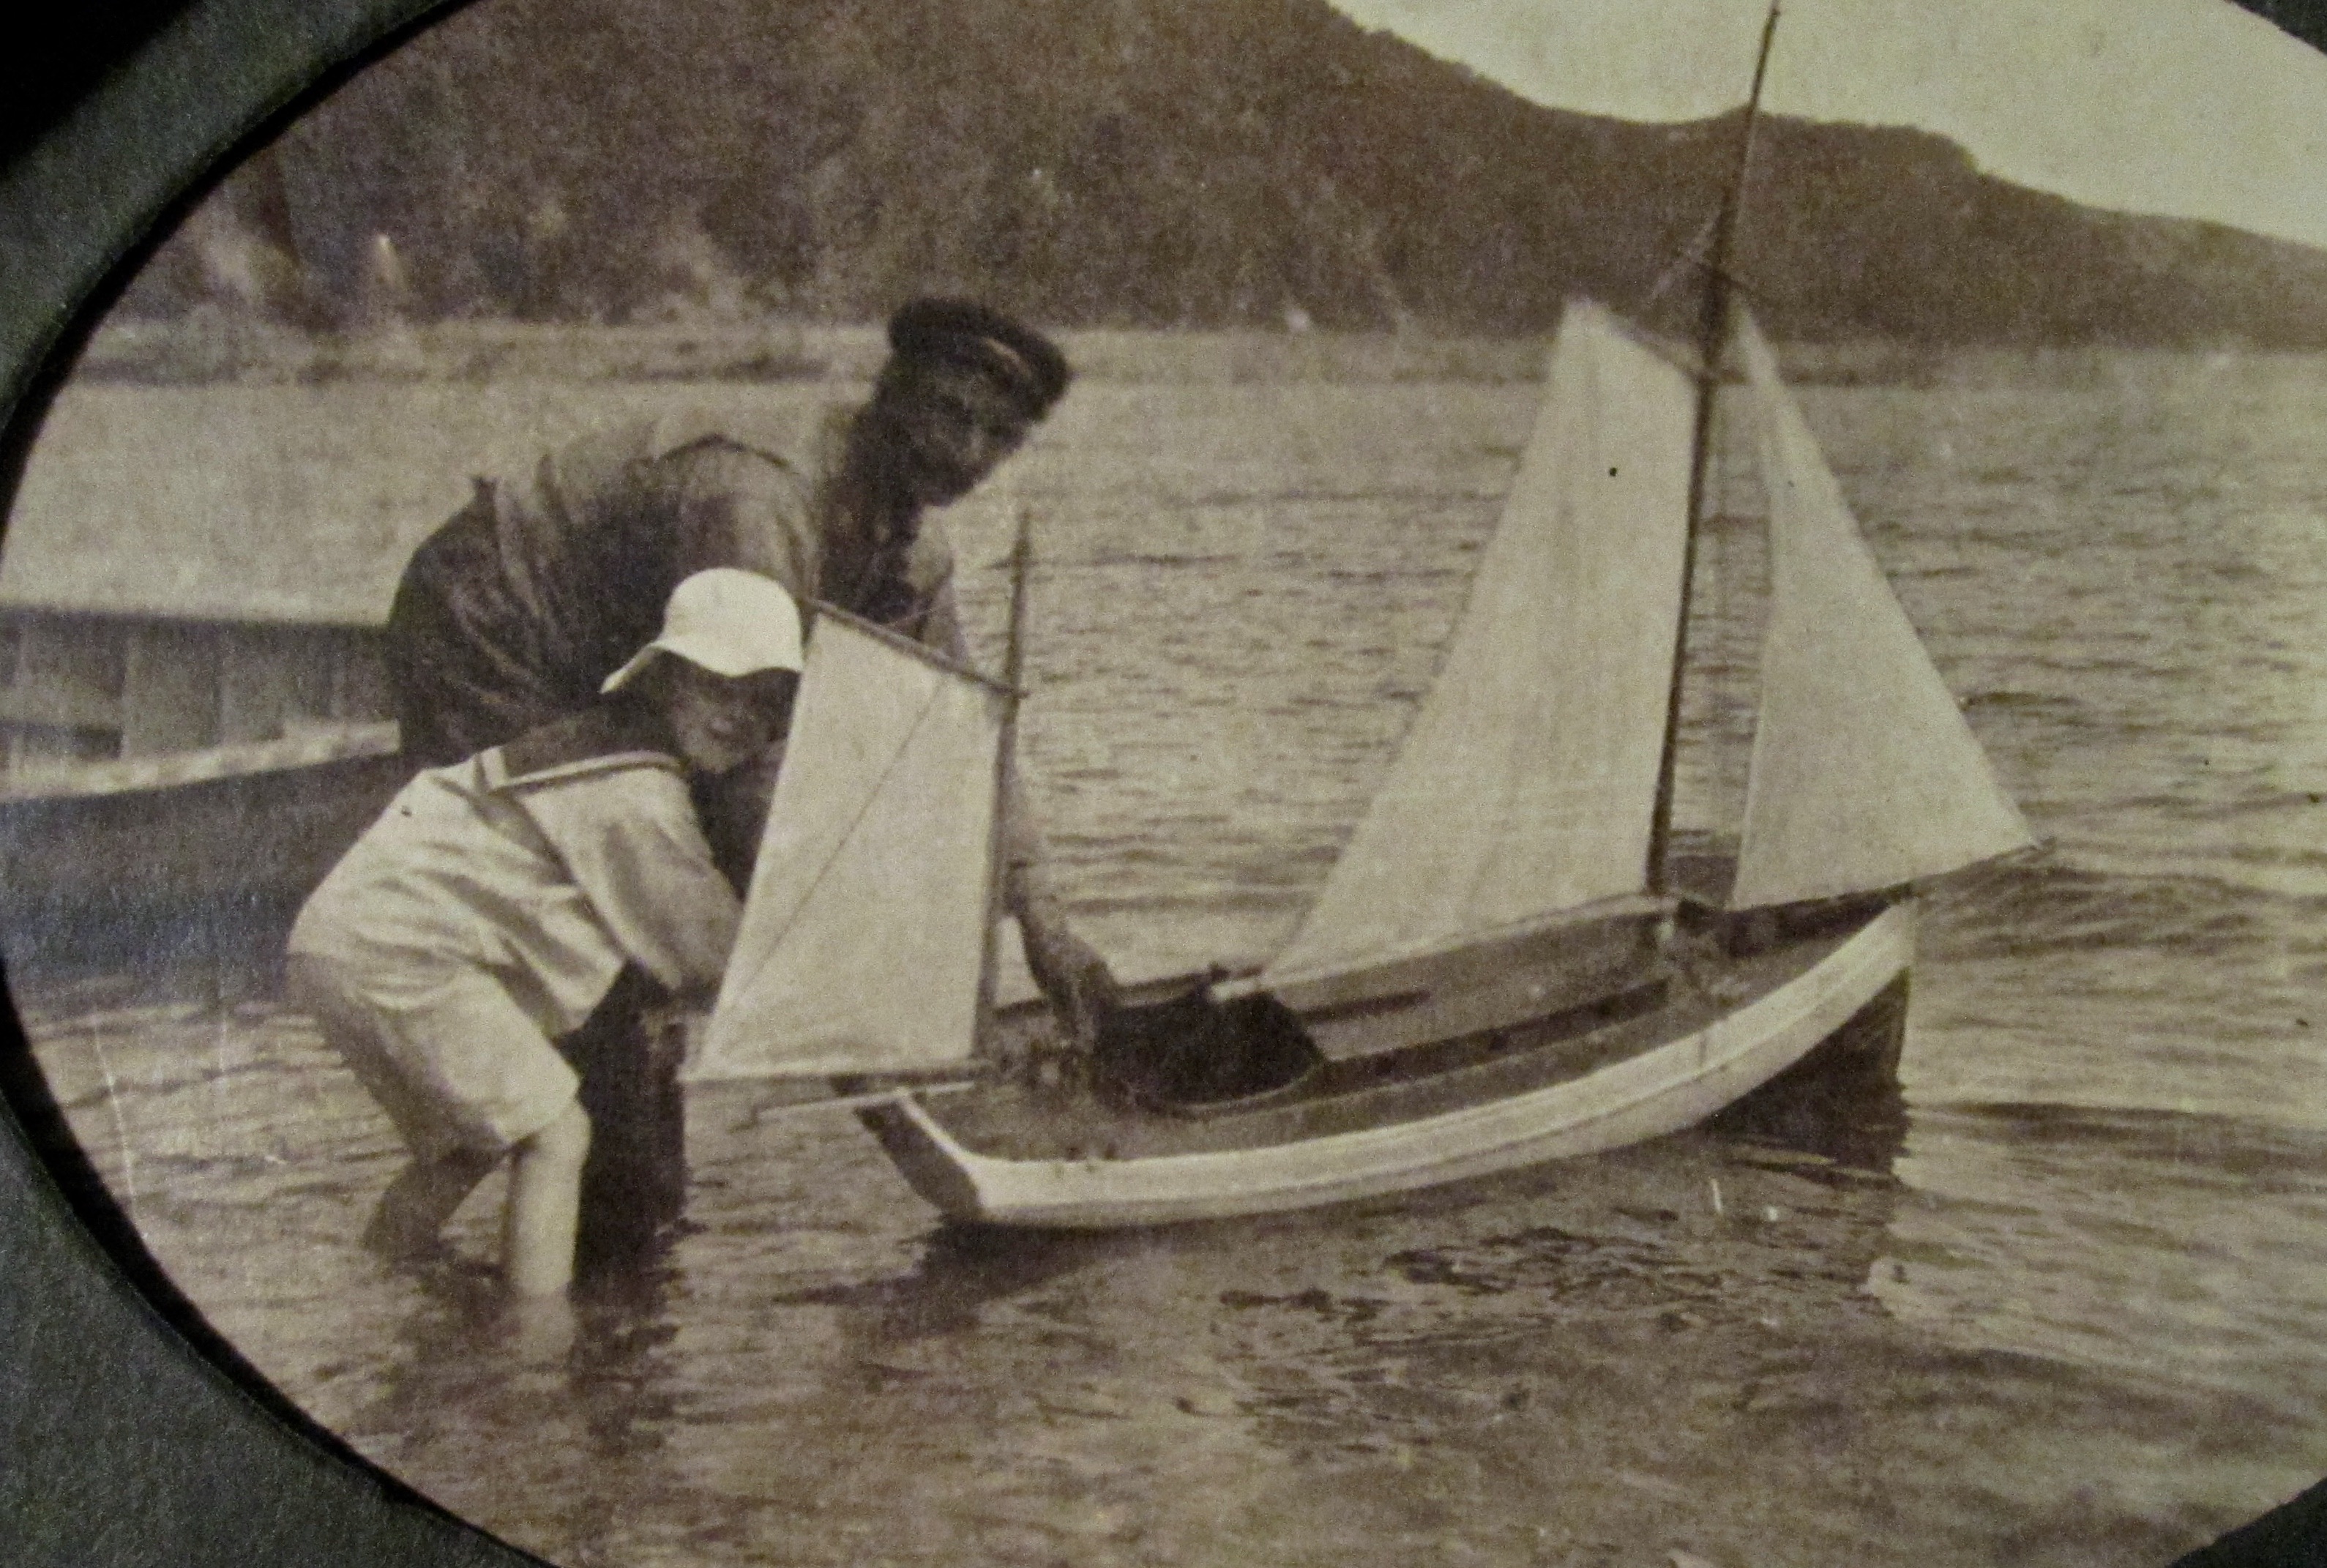 A man helps a boy in a sailor suit launch a model sailboat on the river.